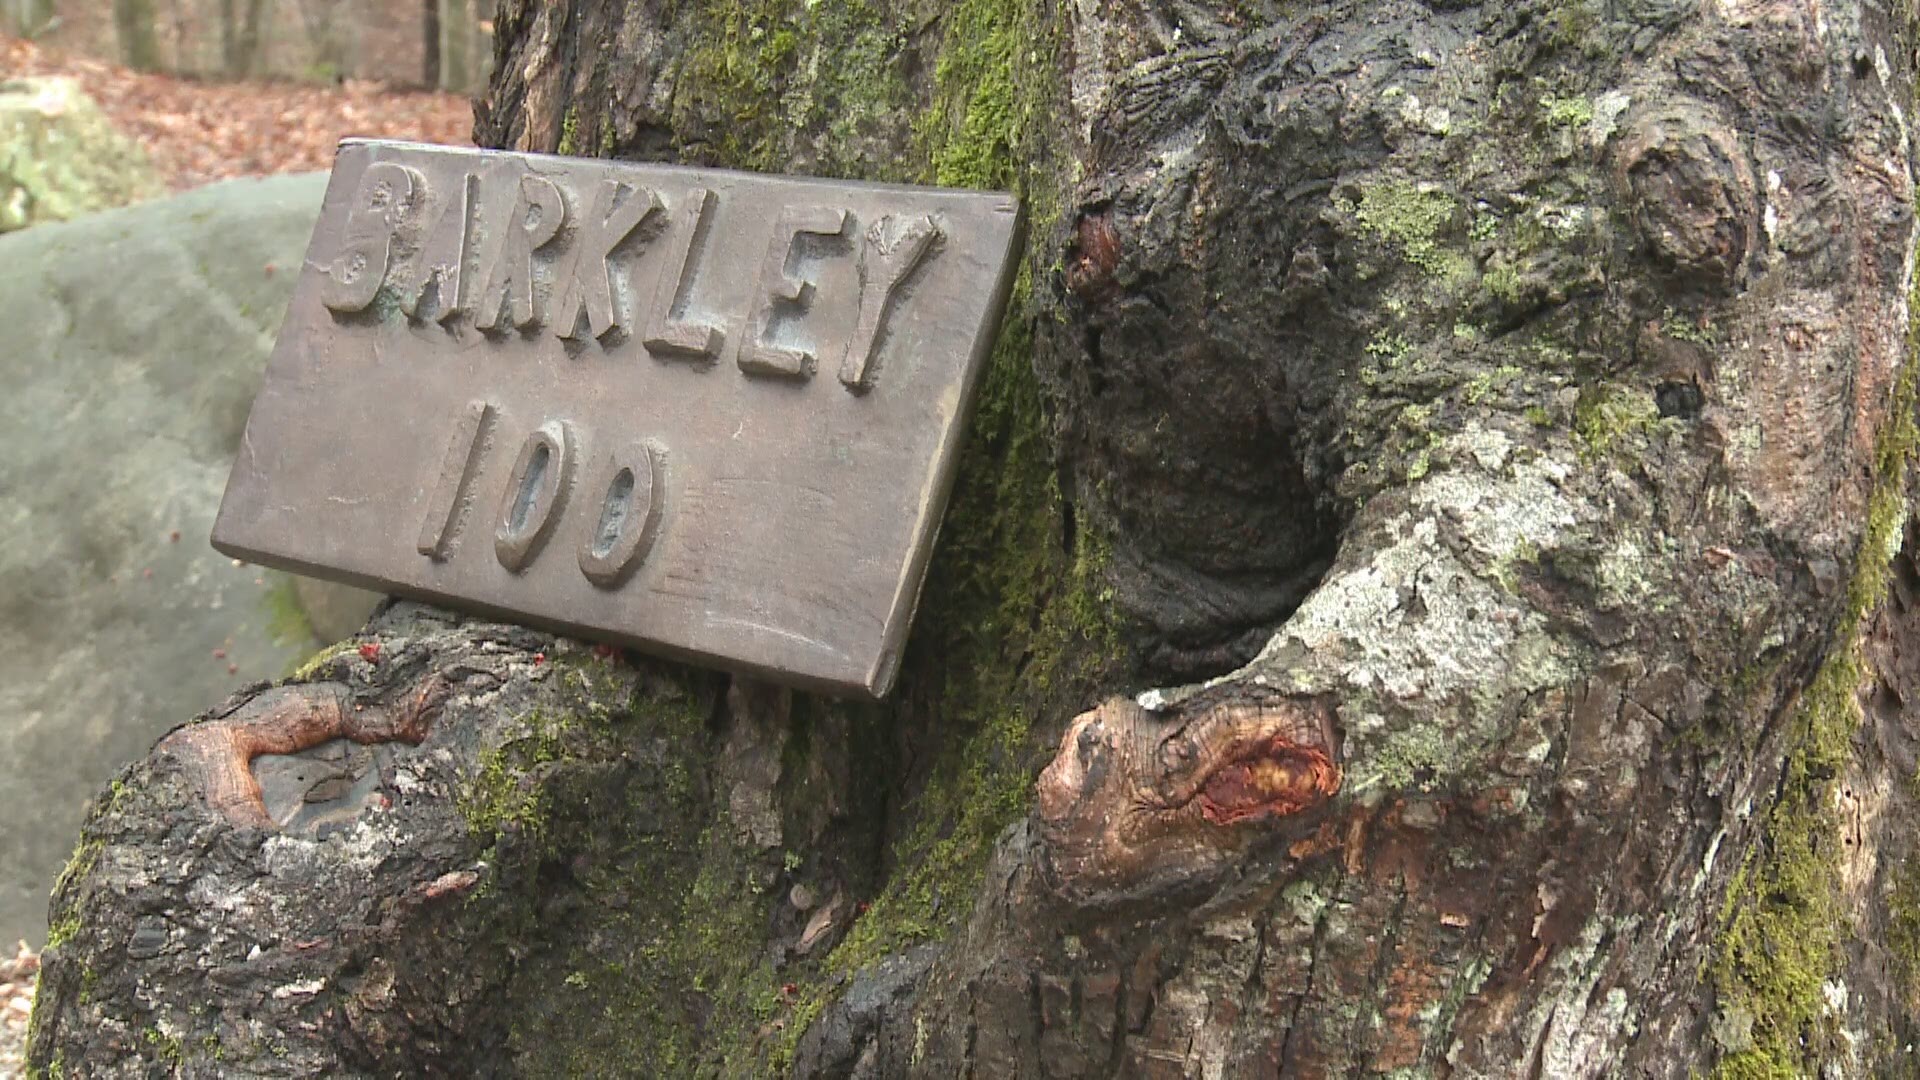 March 31, 2014:  One man finished the 2014 Barkley Marathons, a ridiculous race that humbles the largest ultra-marathon egos in the running world.